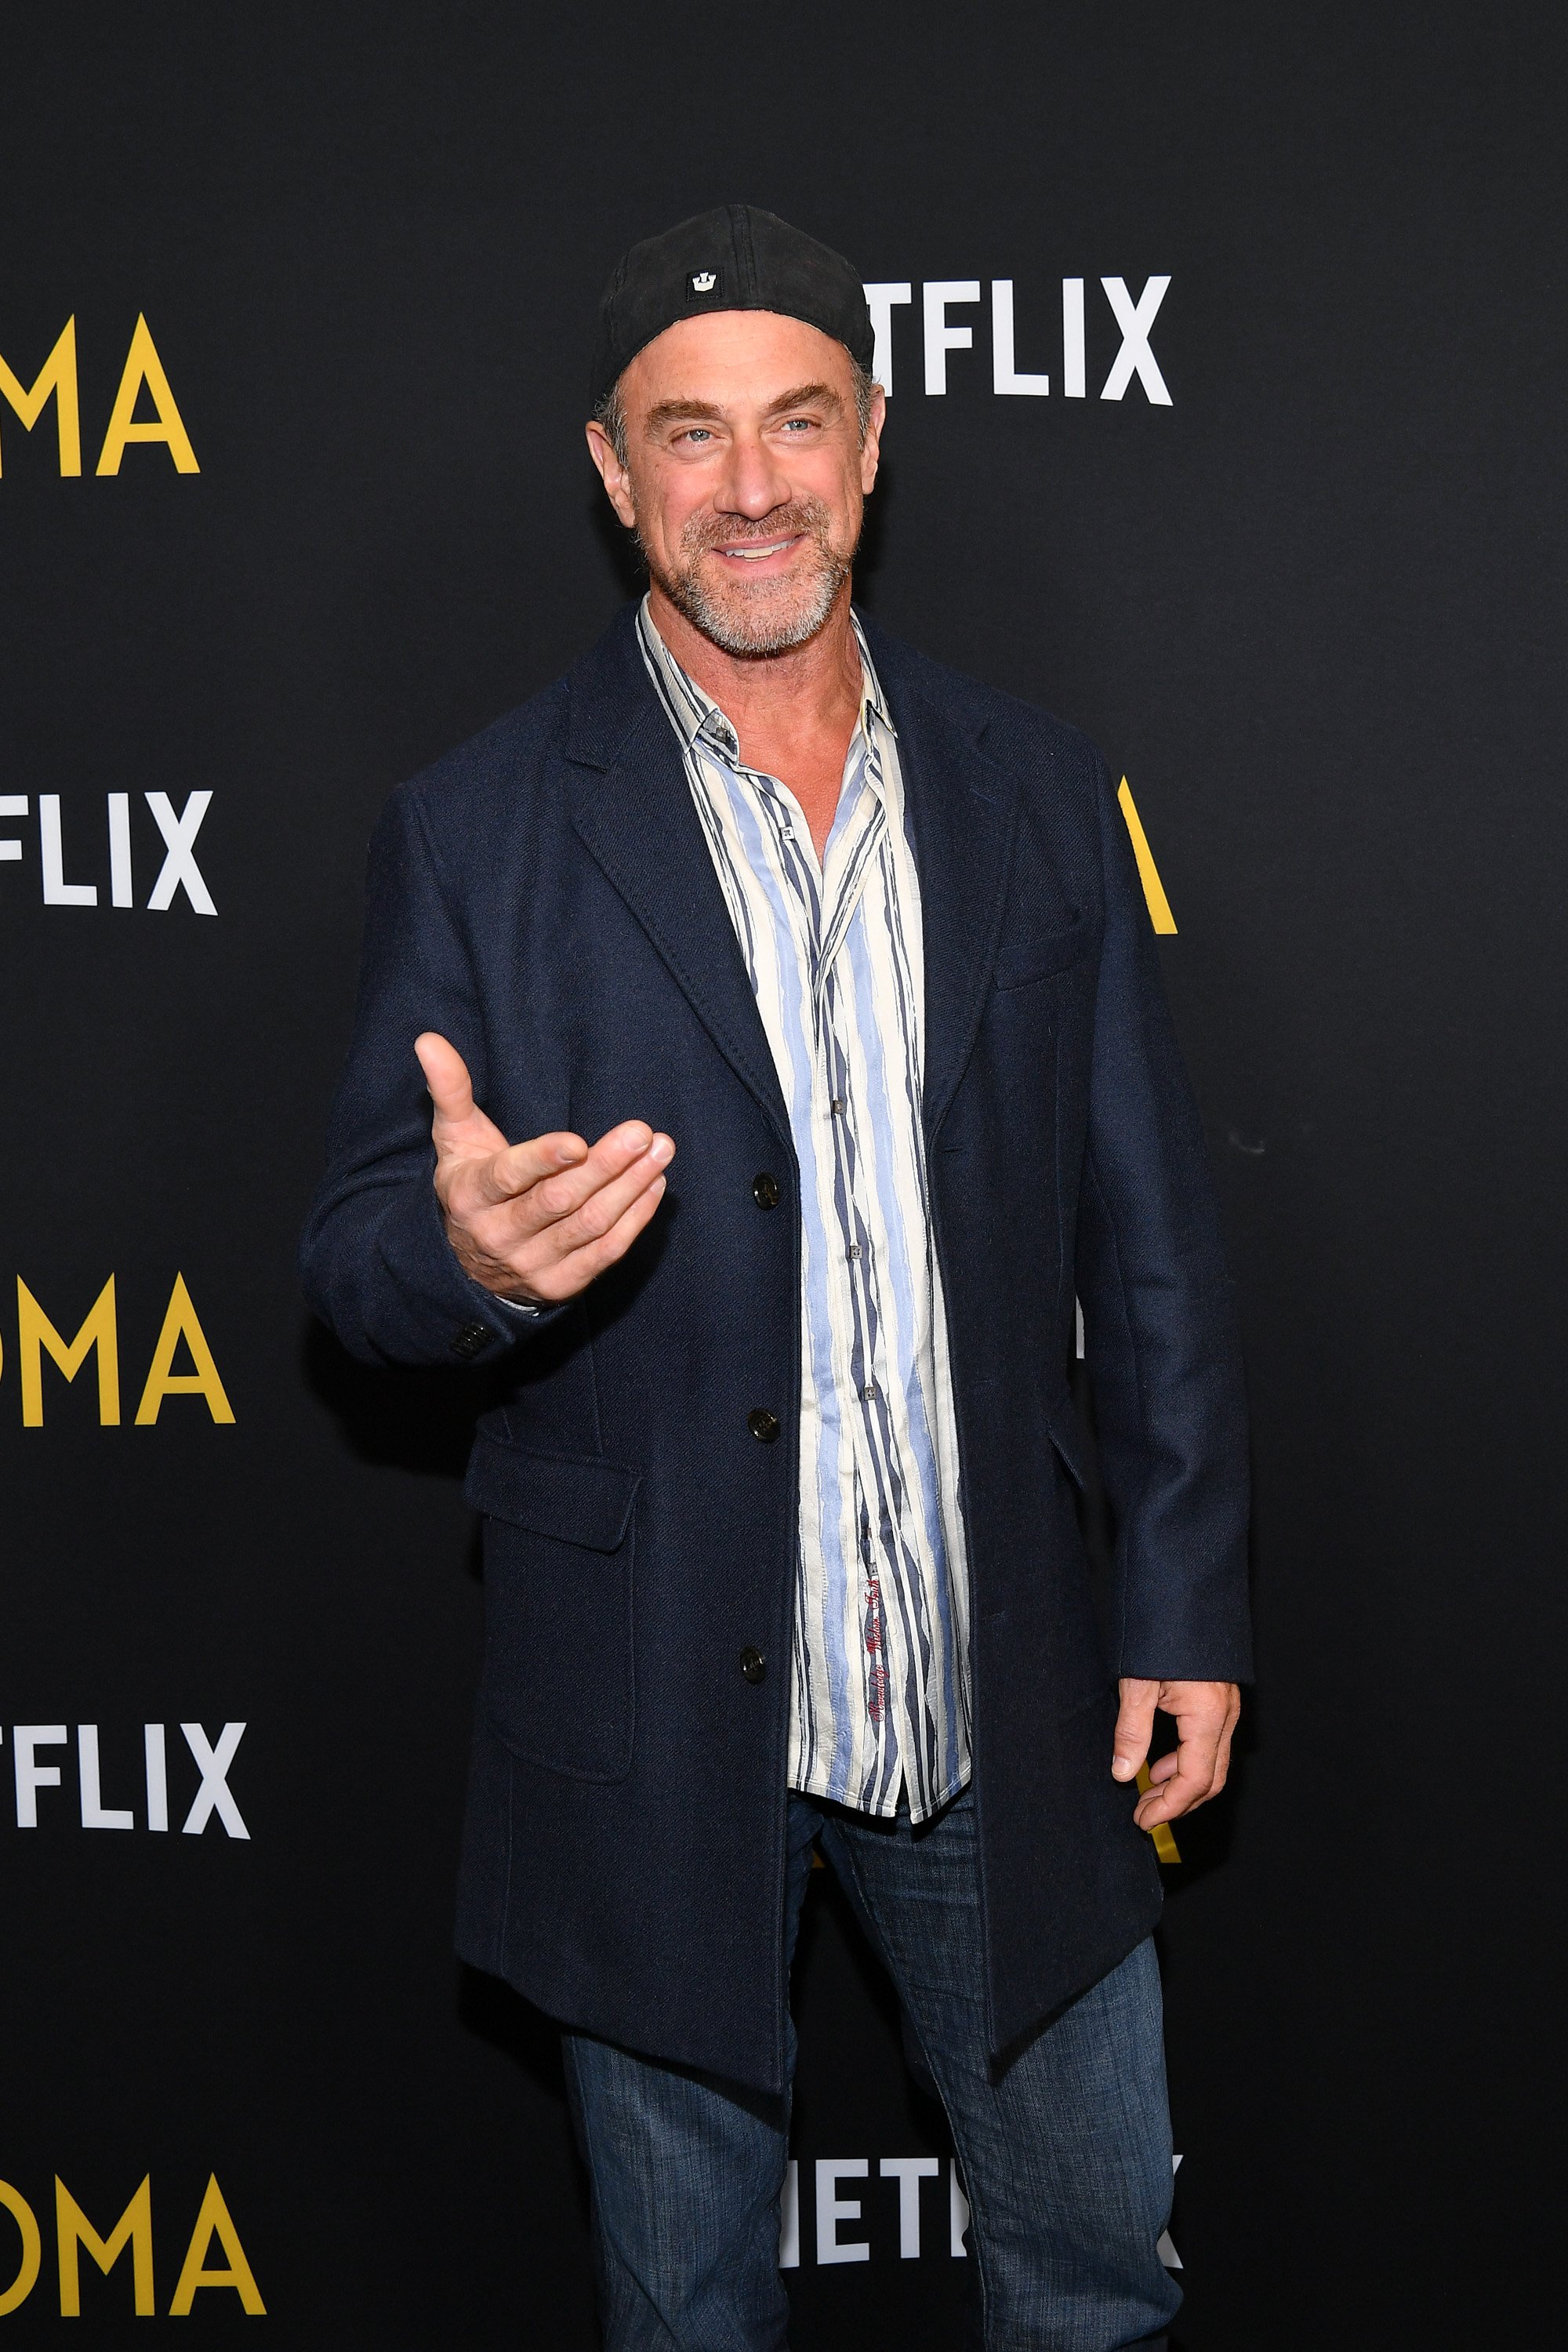 Christopher Meloni attends the "Roma" screening in New York City on November 27, 2018 | Photo: Getty Images